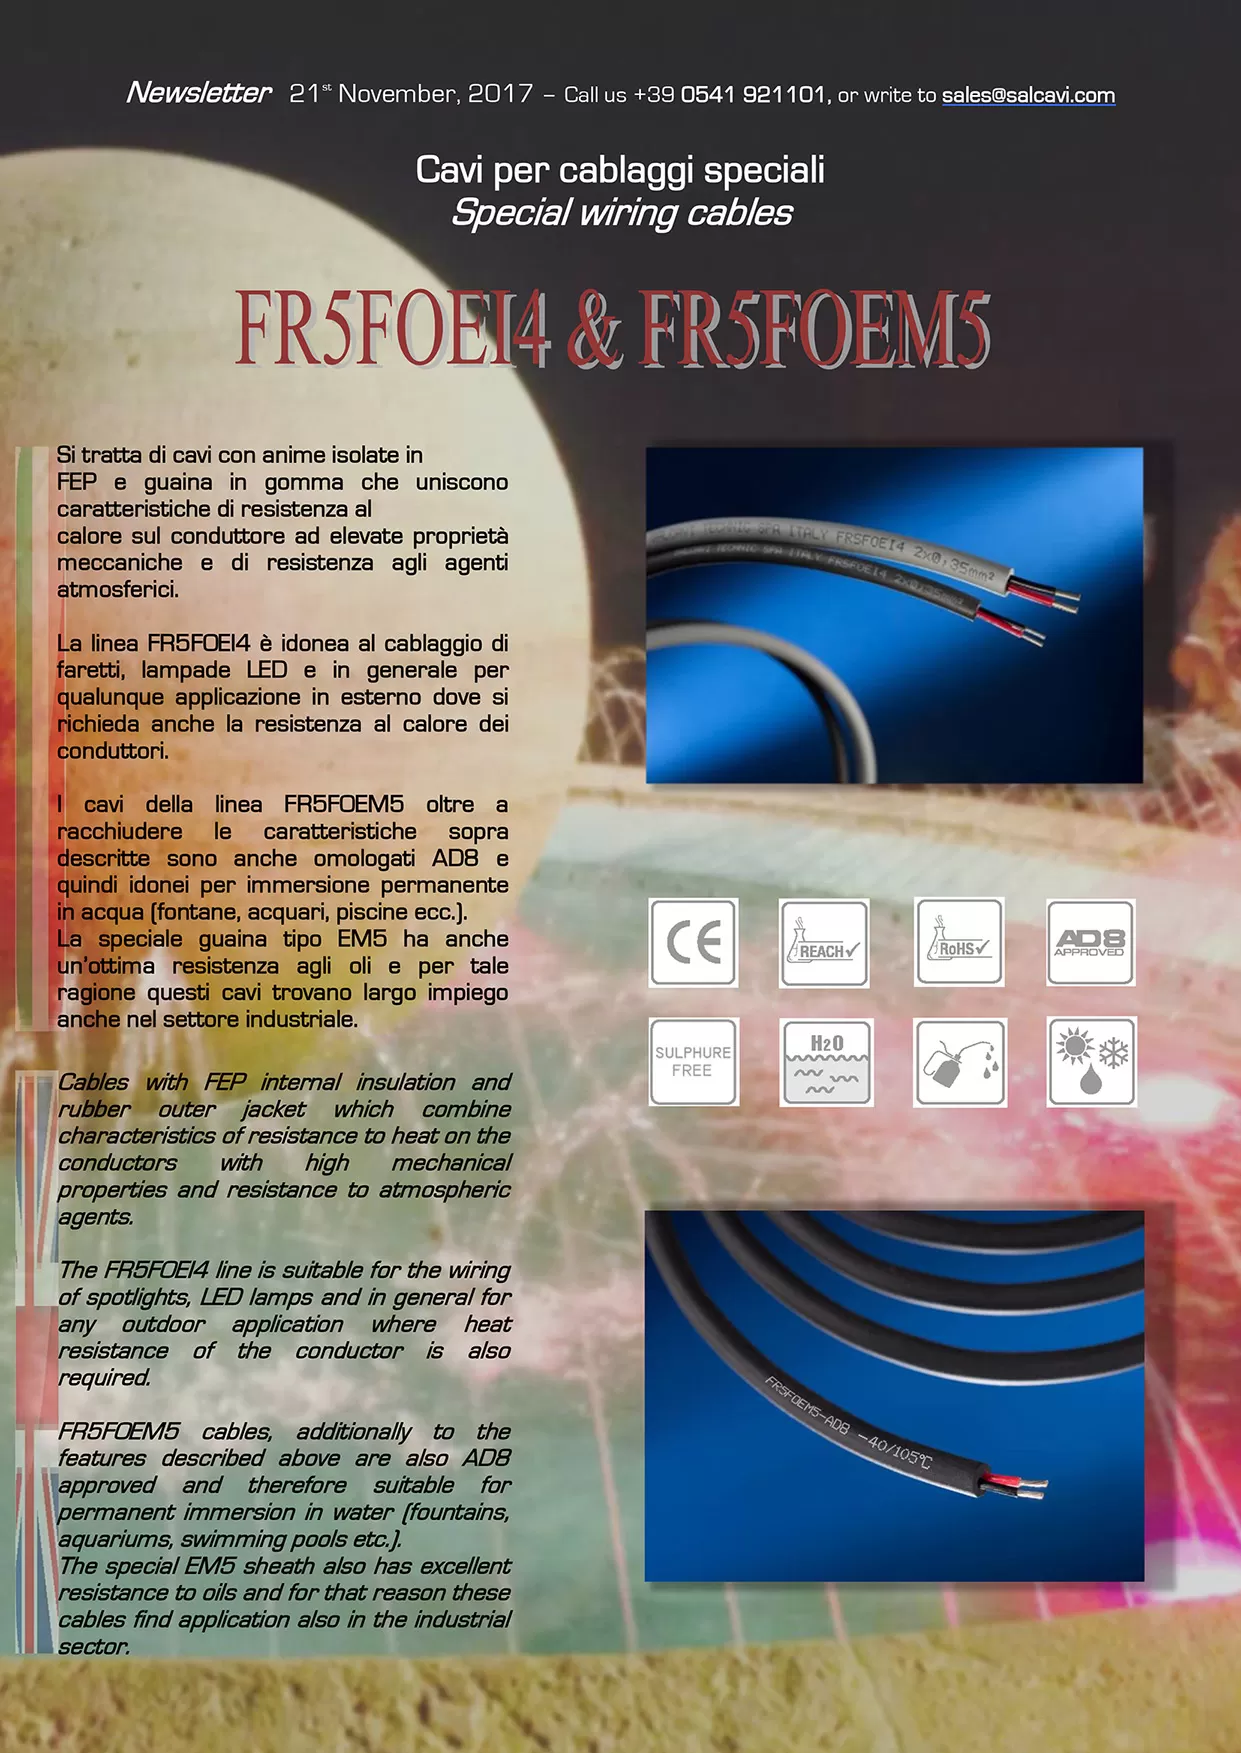 FR5FOEI4 and FR5FOEM5 cables